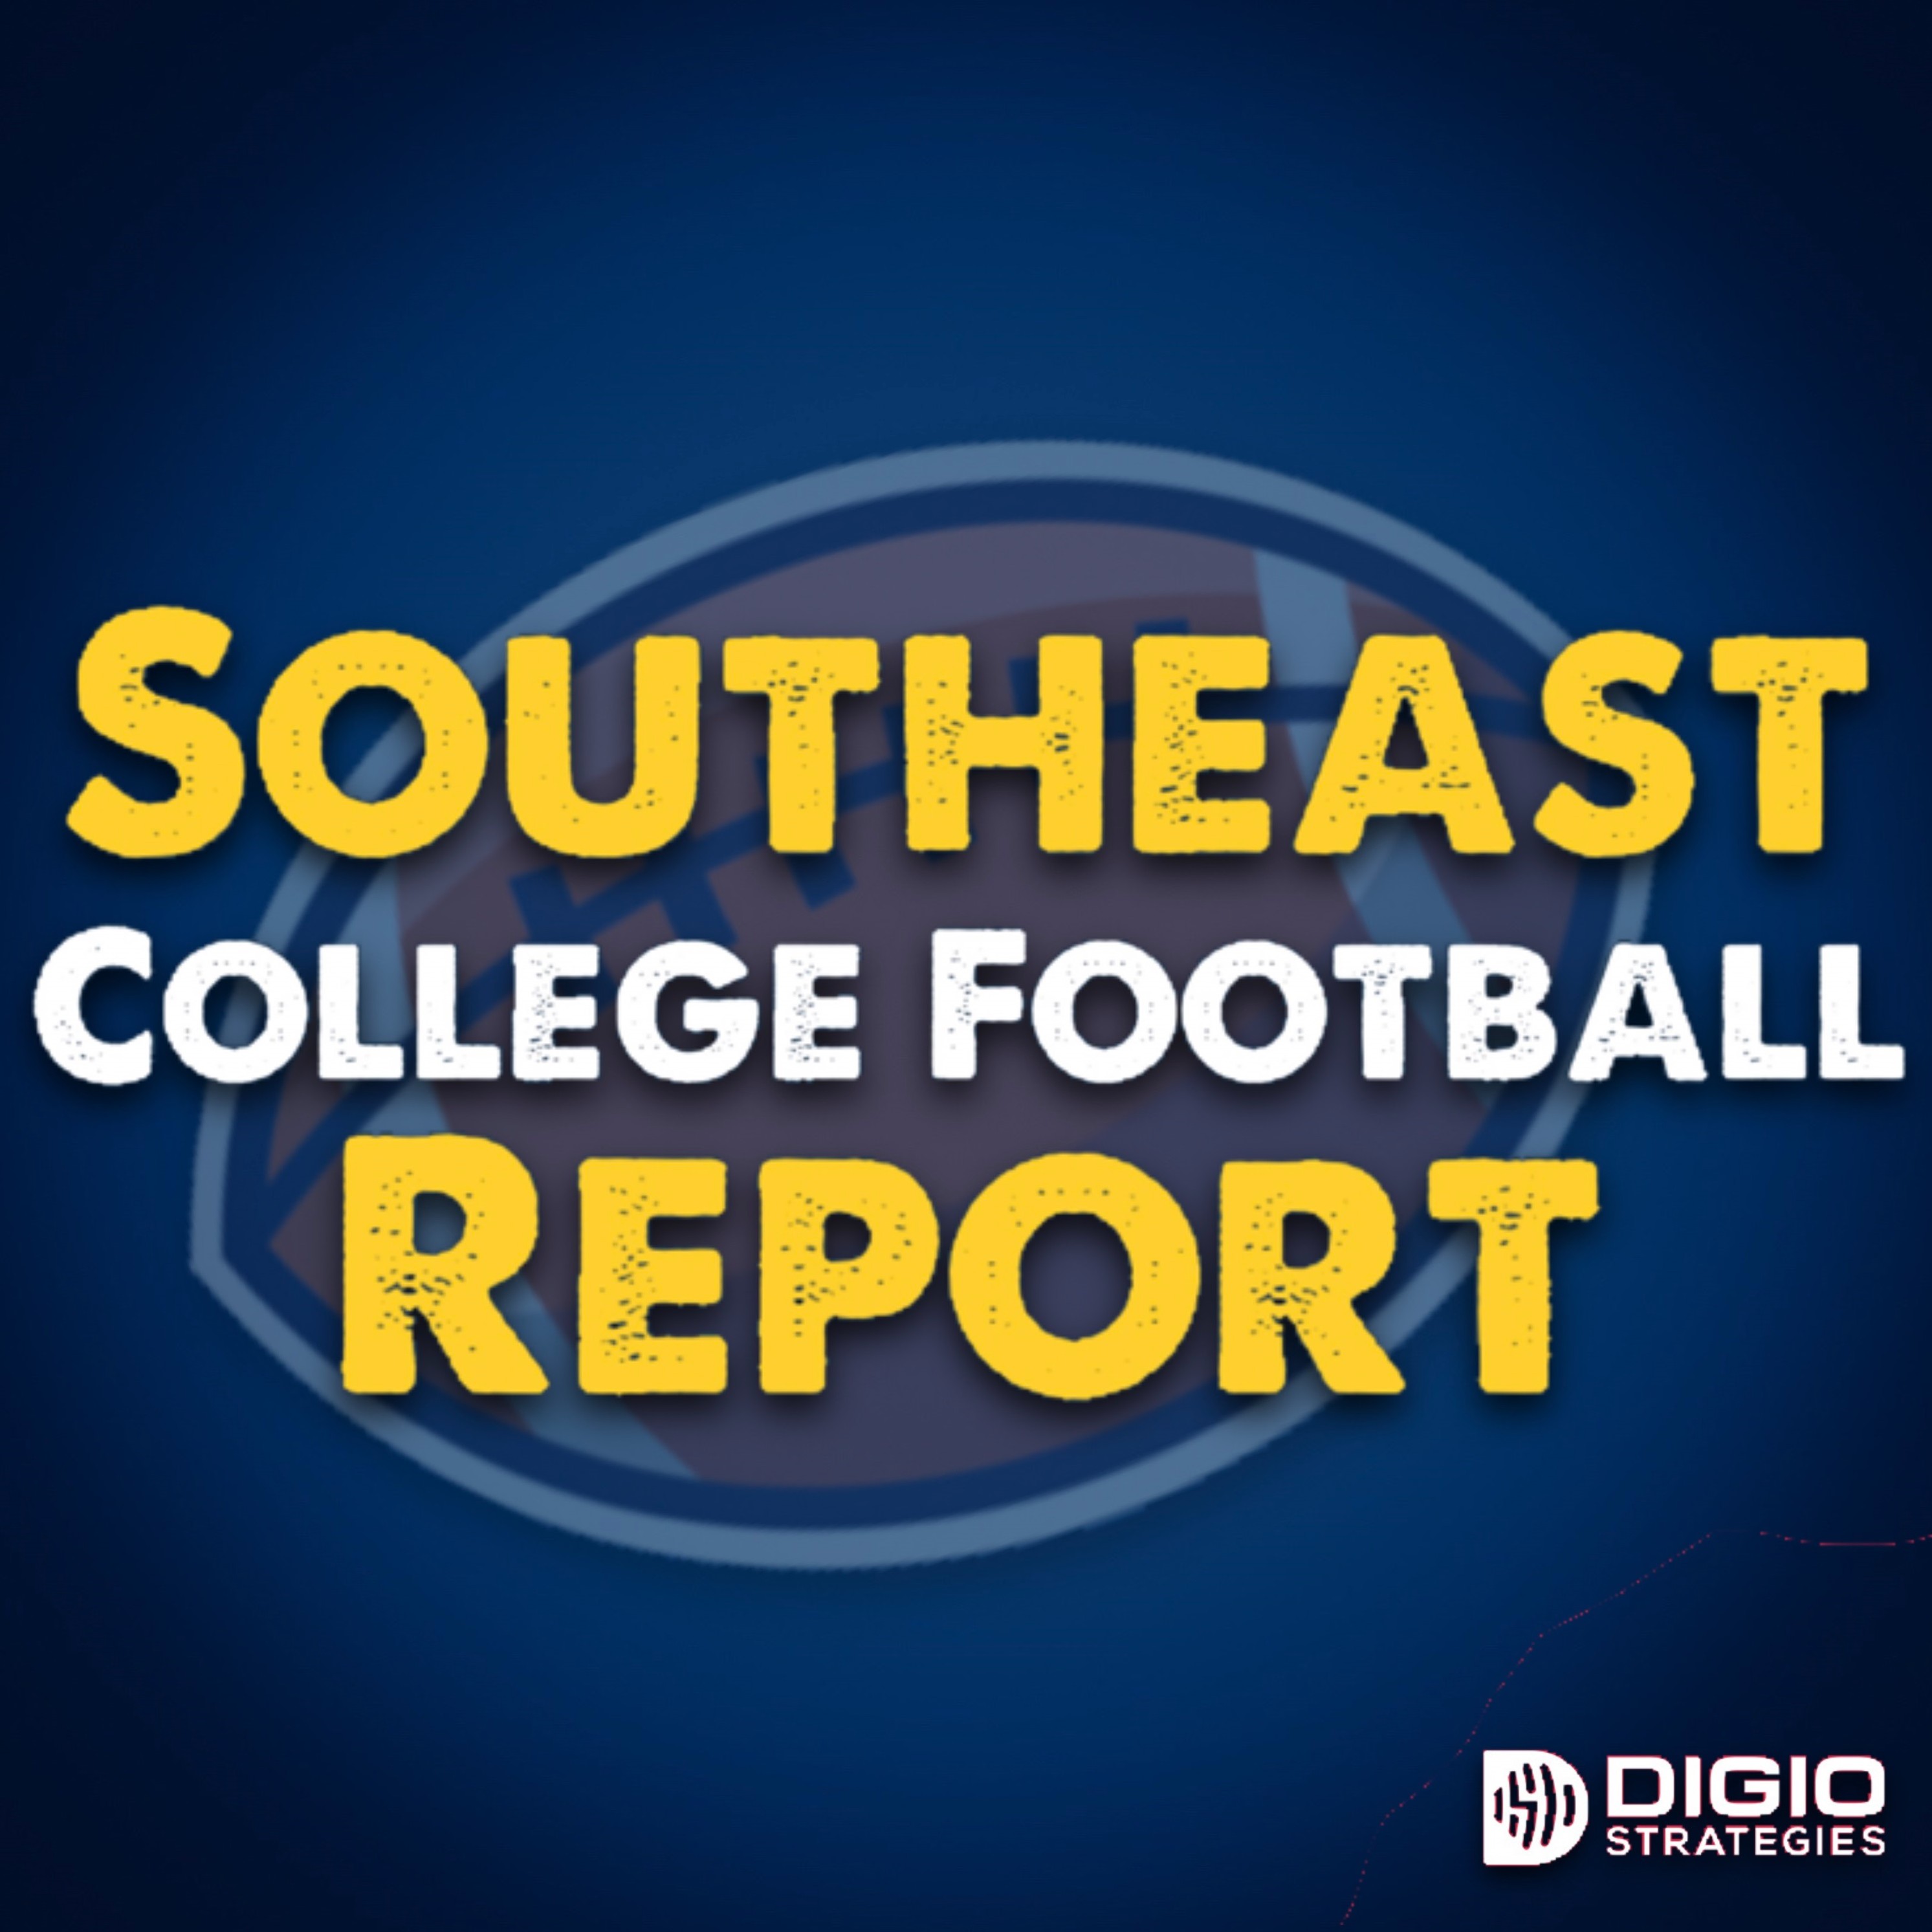 The Southeast College Football Report